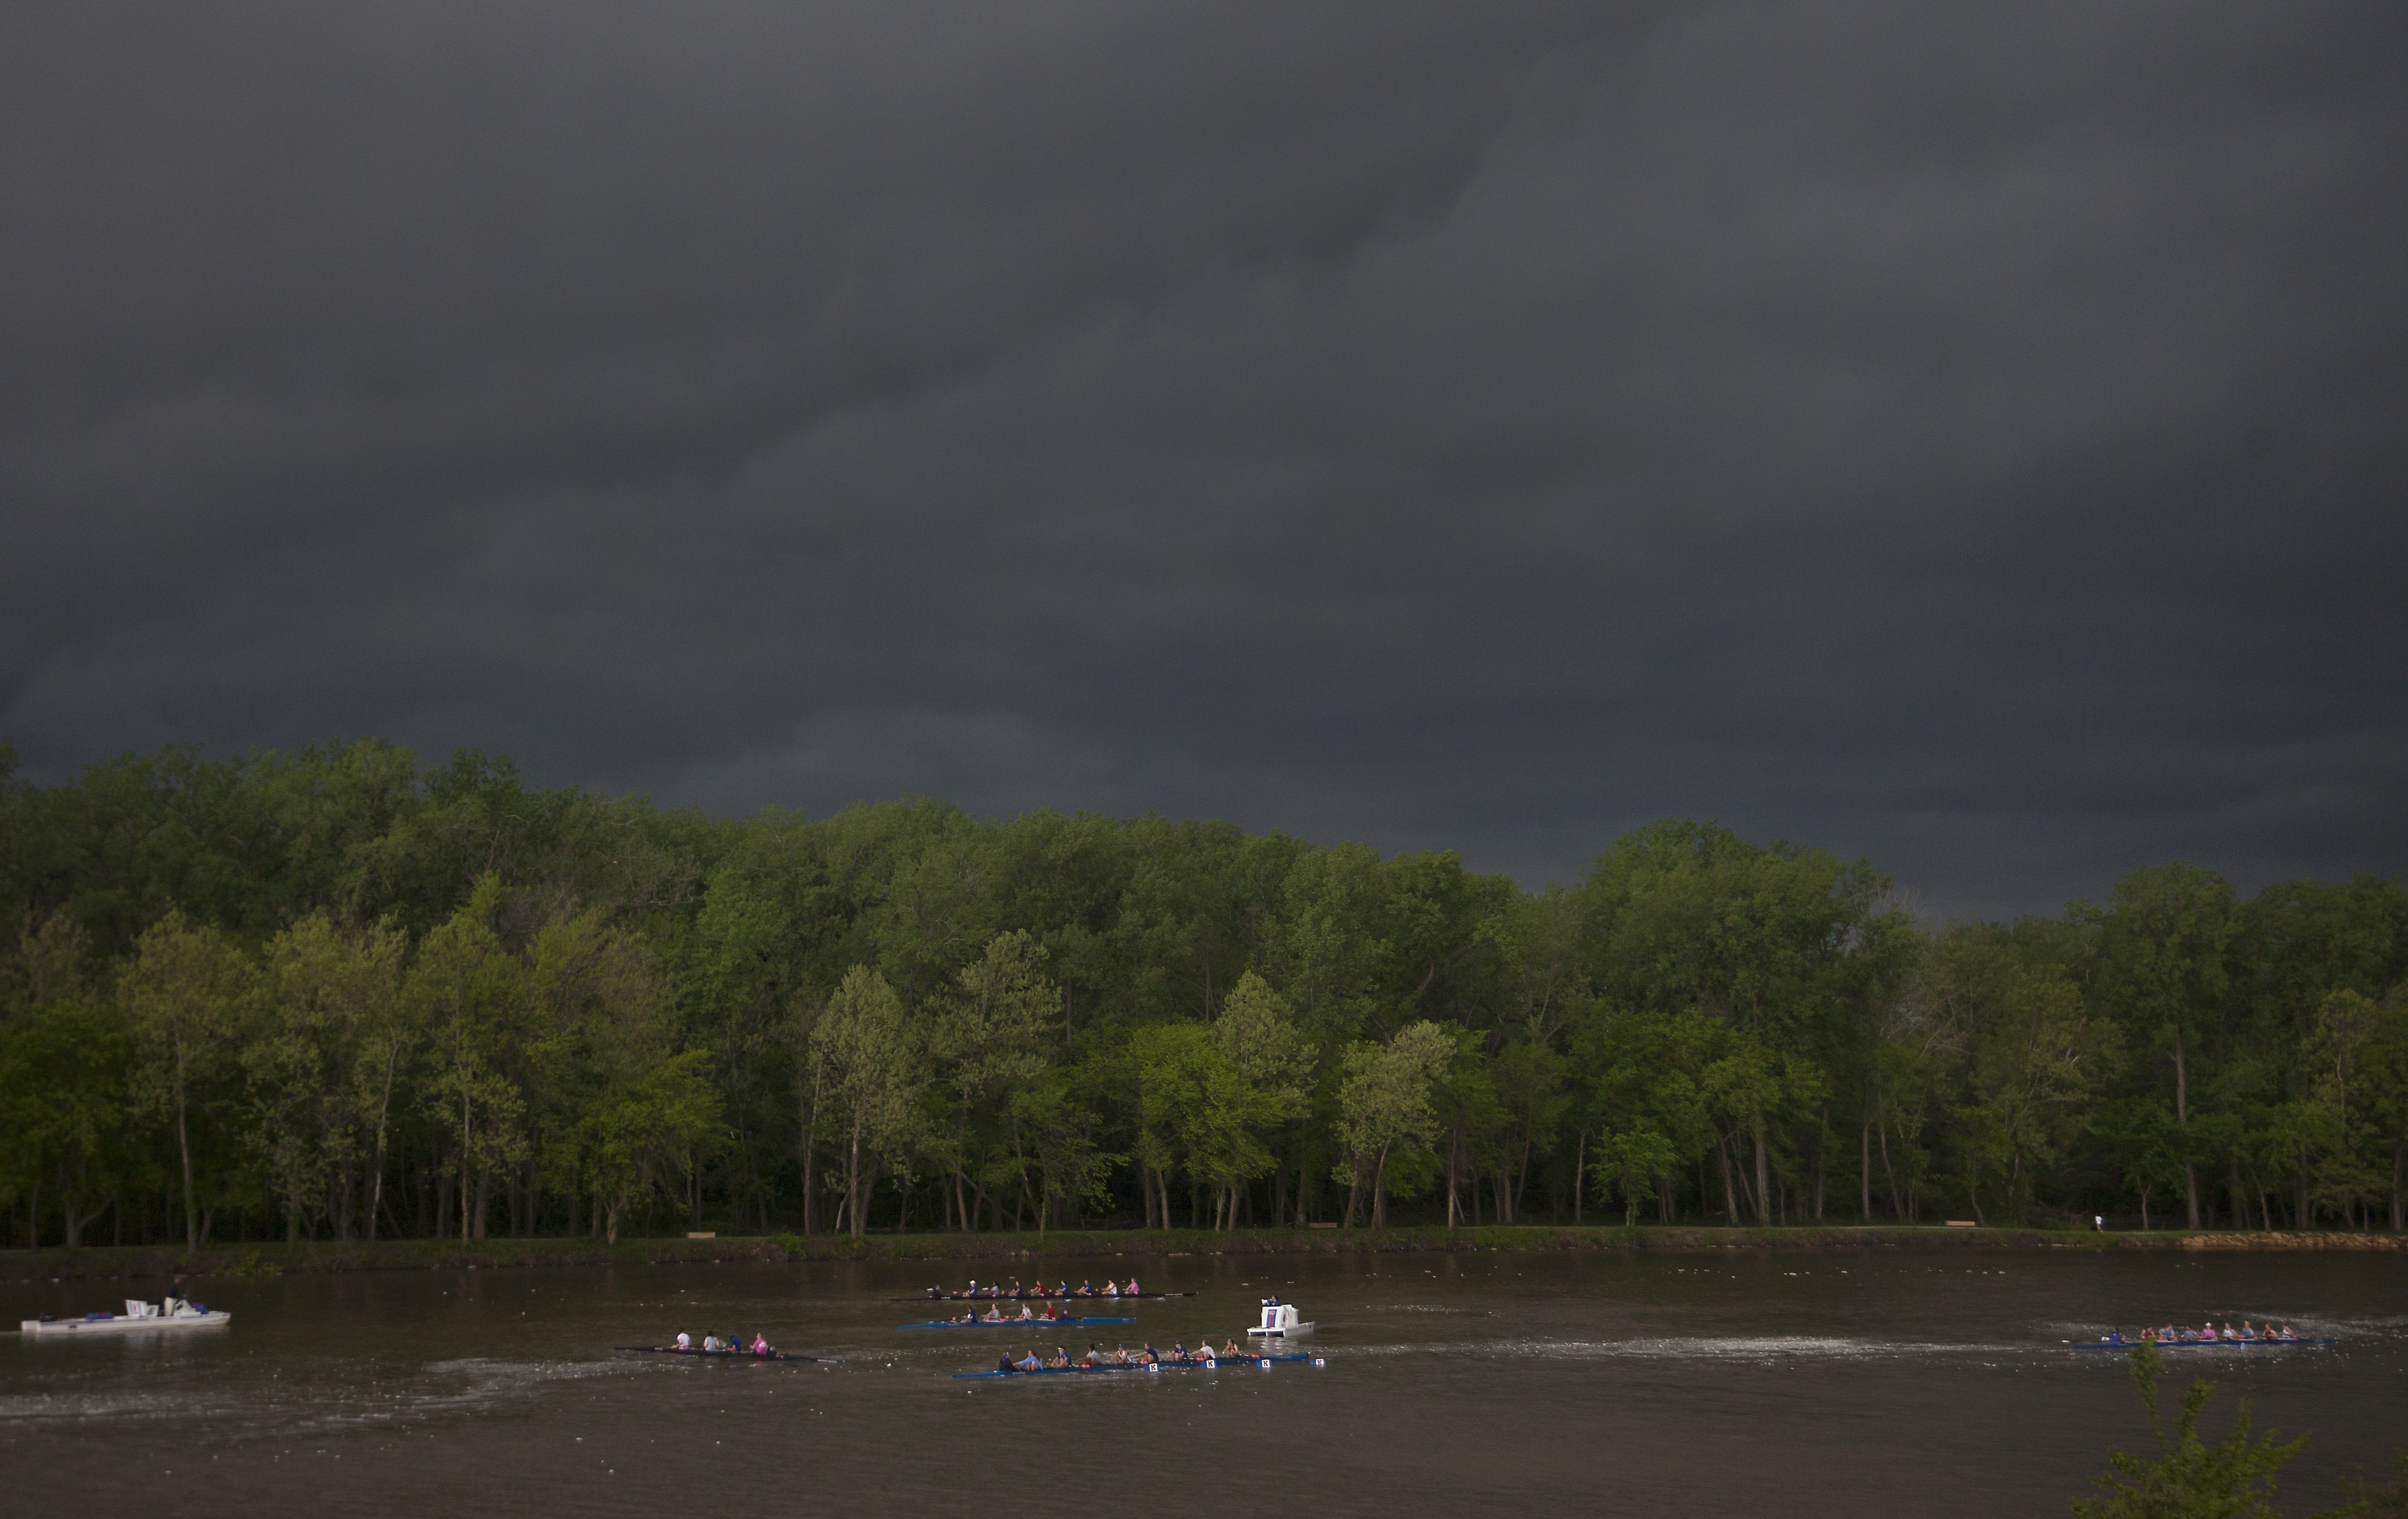 The Kansas University rowing team practices on the Kansas River under threatening clouds as a storm front moves over Lawrence, Kan. early Tuesday morning, April 26, 2016.